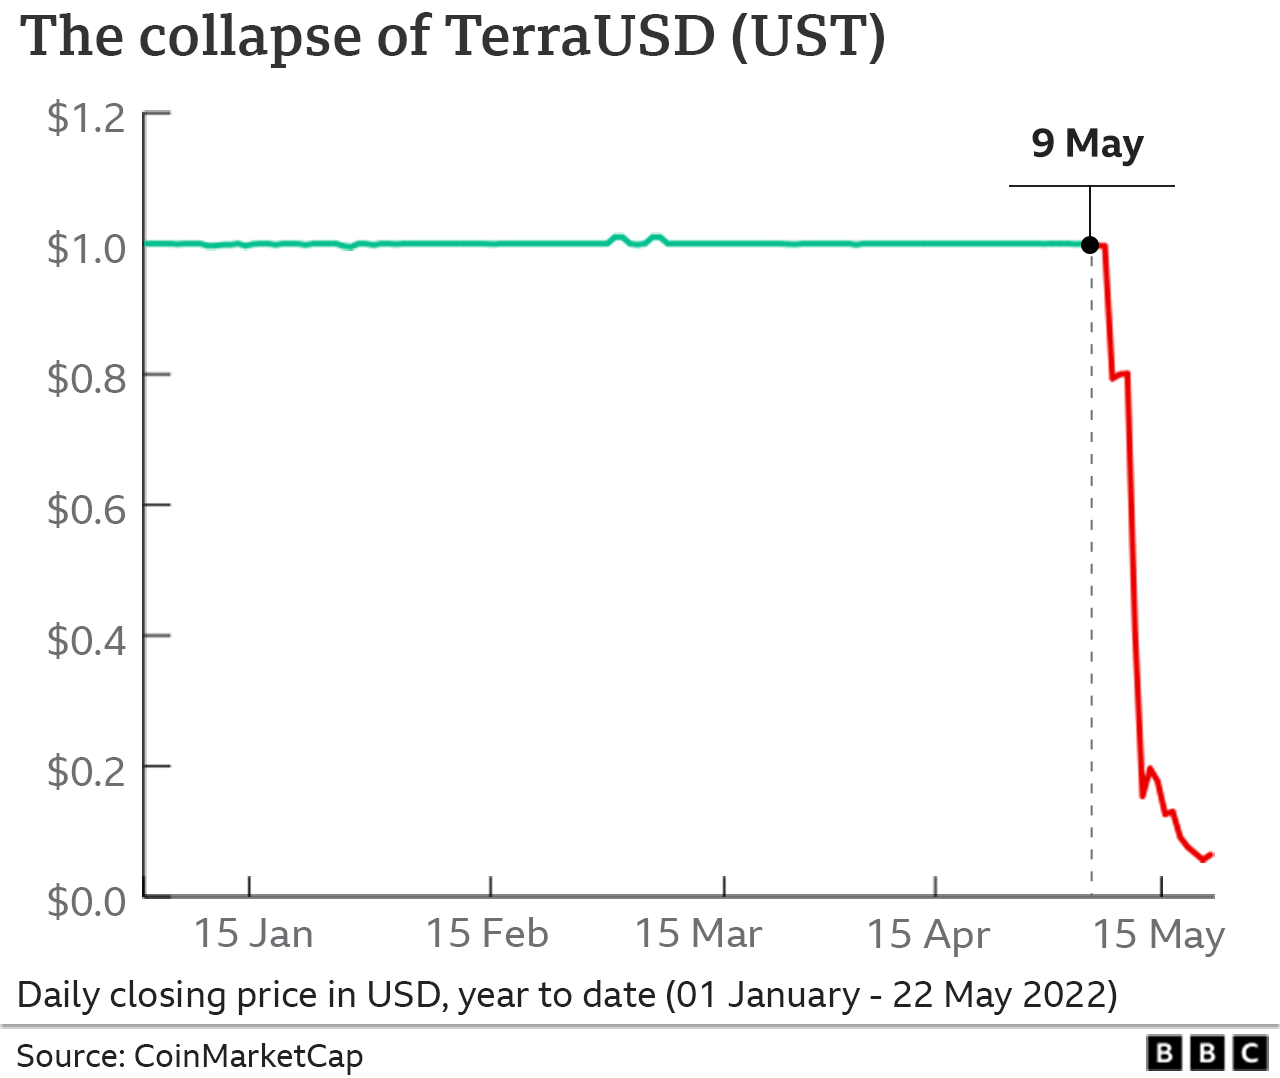 Chart showing the collapse of TerraUSD